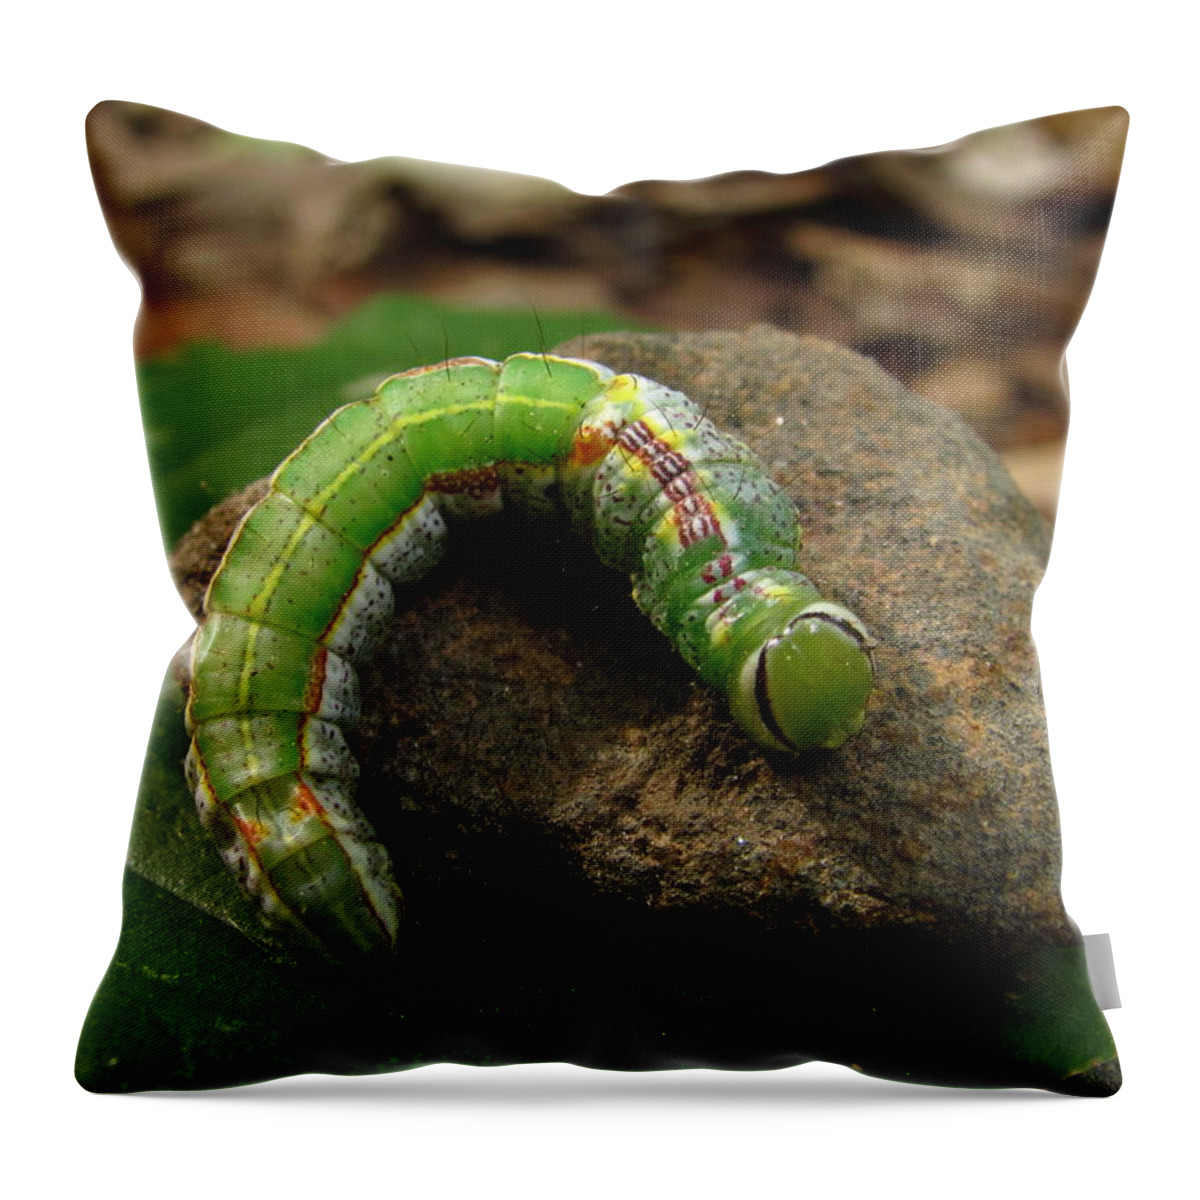 Colorful Caterpillar Images Colorful Caterpillar Prints Unidentified Caterpillar Images Unidentified Caterpillar Prints Forest Ecology Entomology Biodiversity Nature Oldgrowth Forest Preservation Beech Trees Throw Pillow featuring the photograph Colorful Caterpillar by Joshua Bales